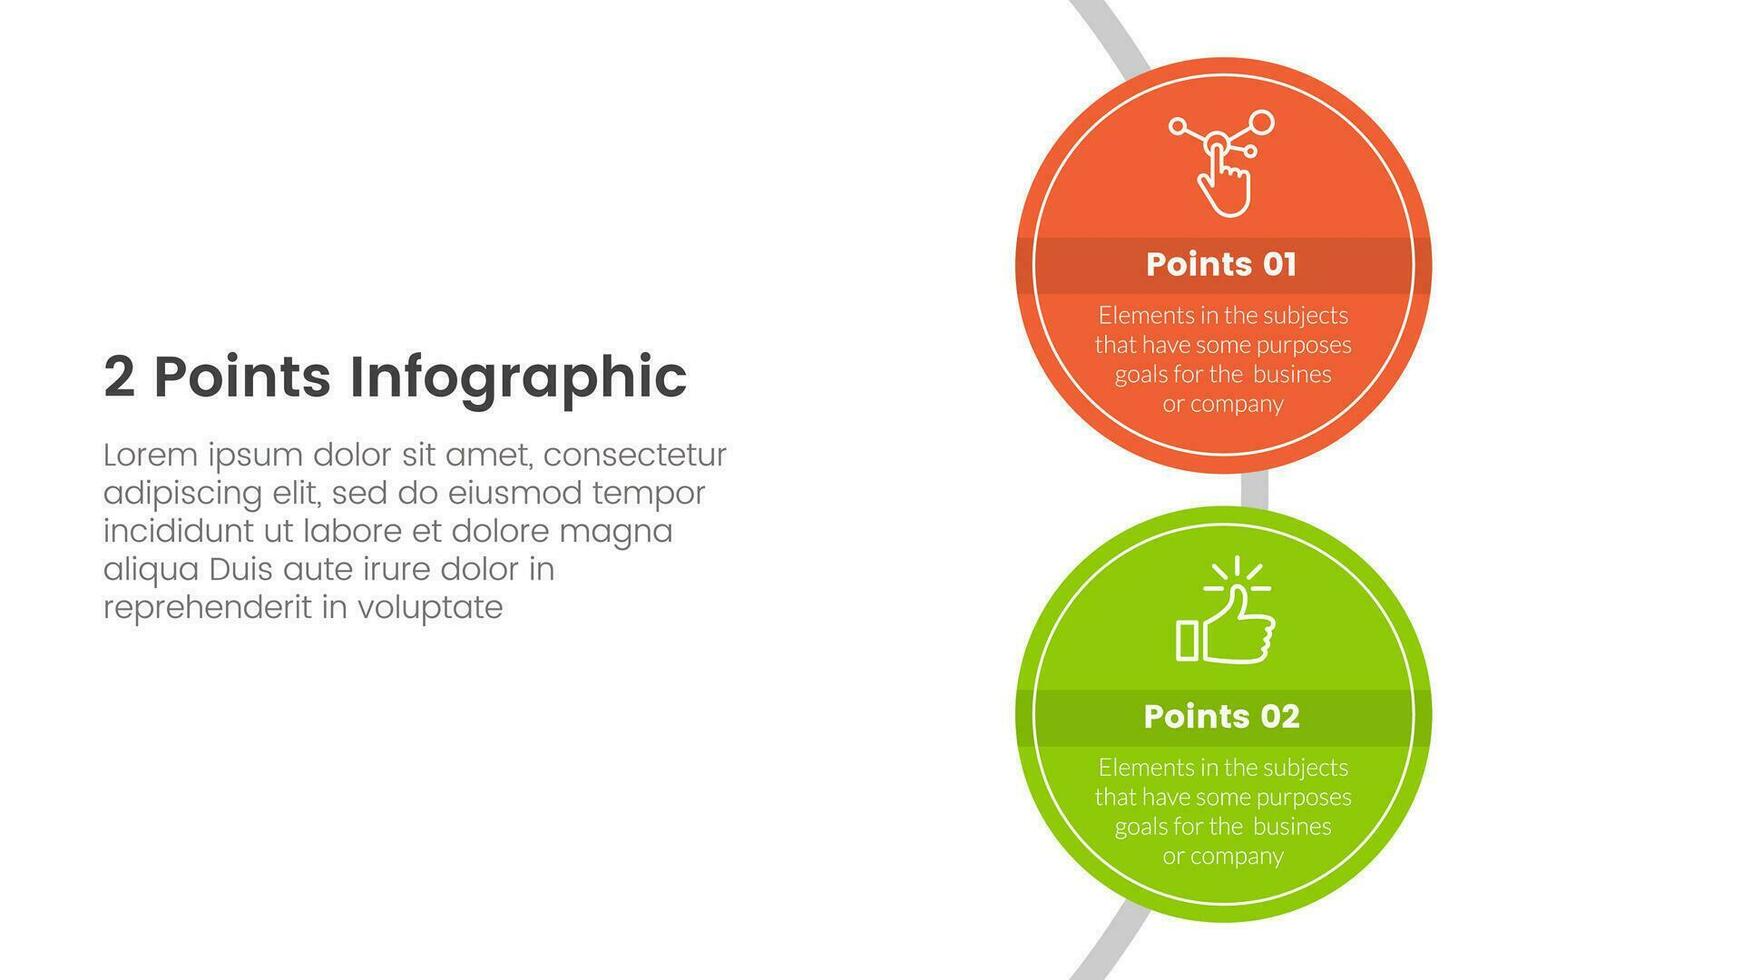 versus or compare and comparison concept for infographic template banner with big circle vertical with two point list information vector